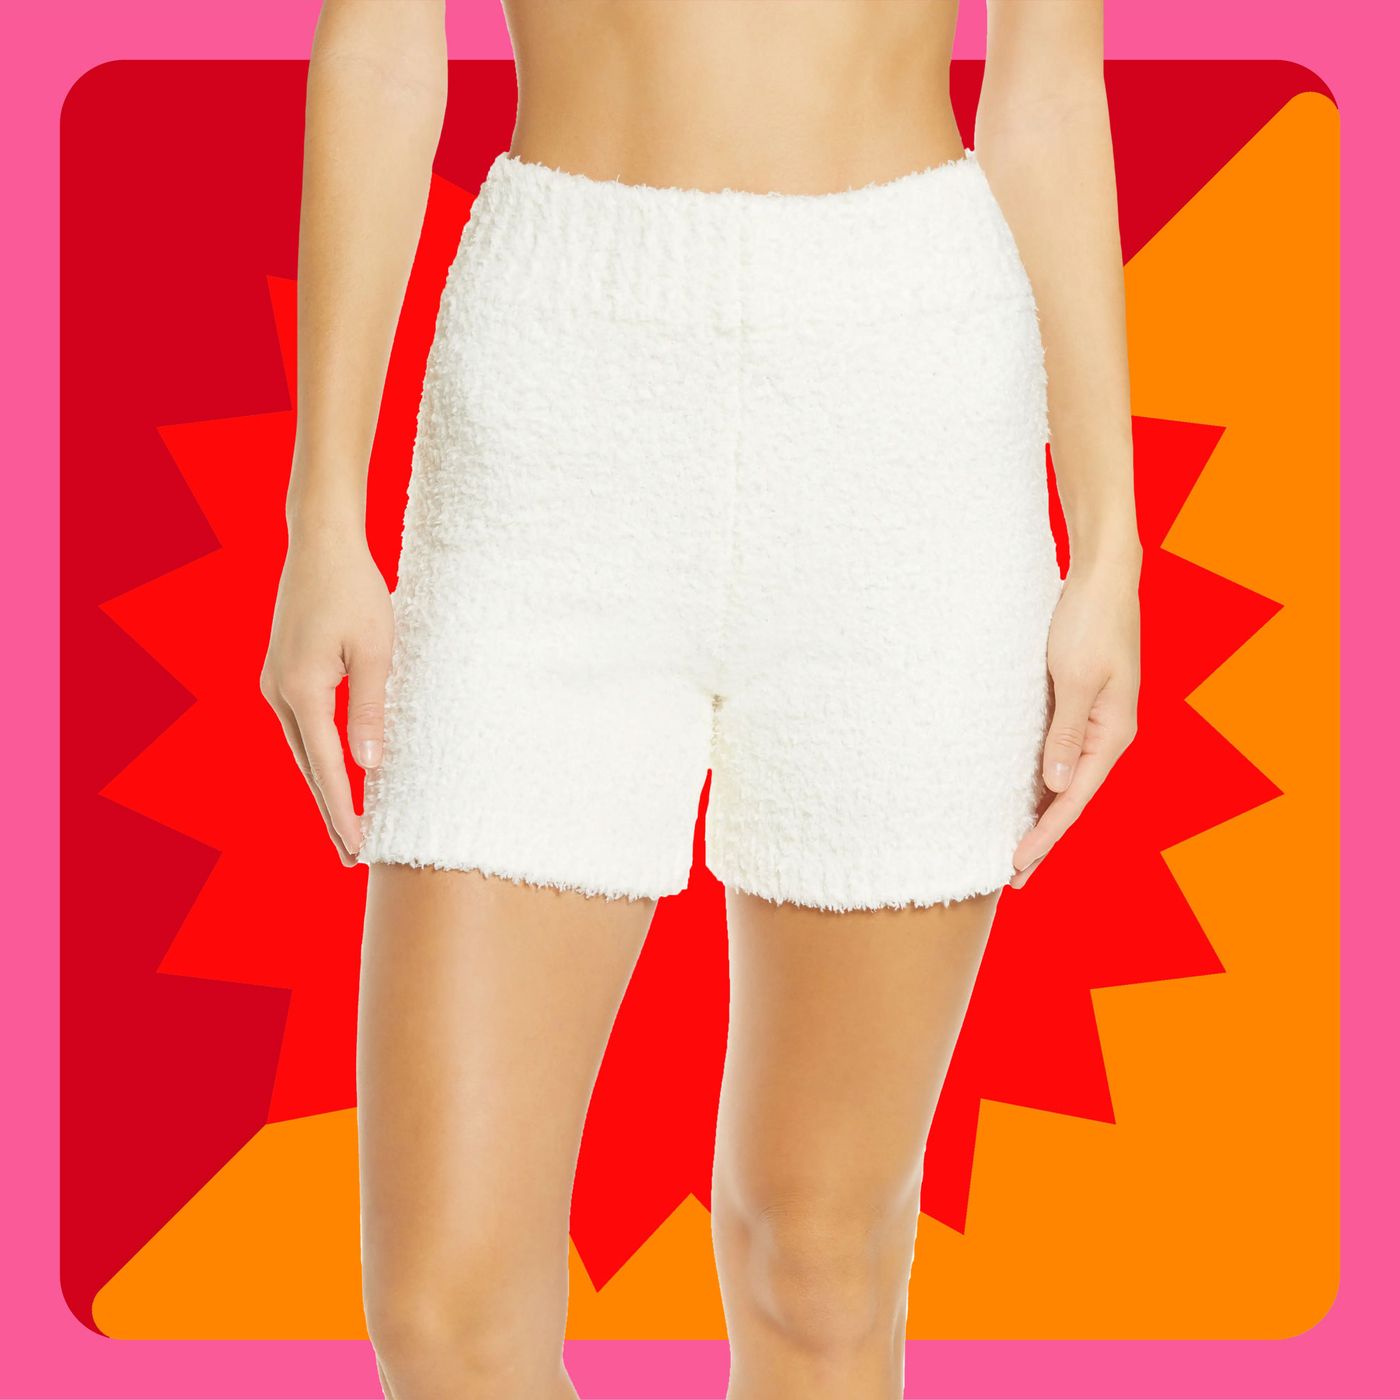 Skims Barely There Shorts $24